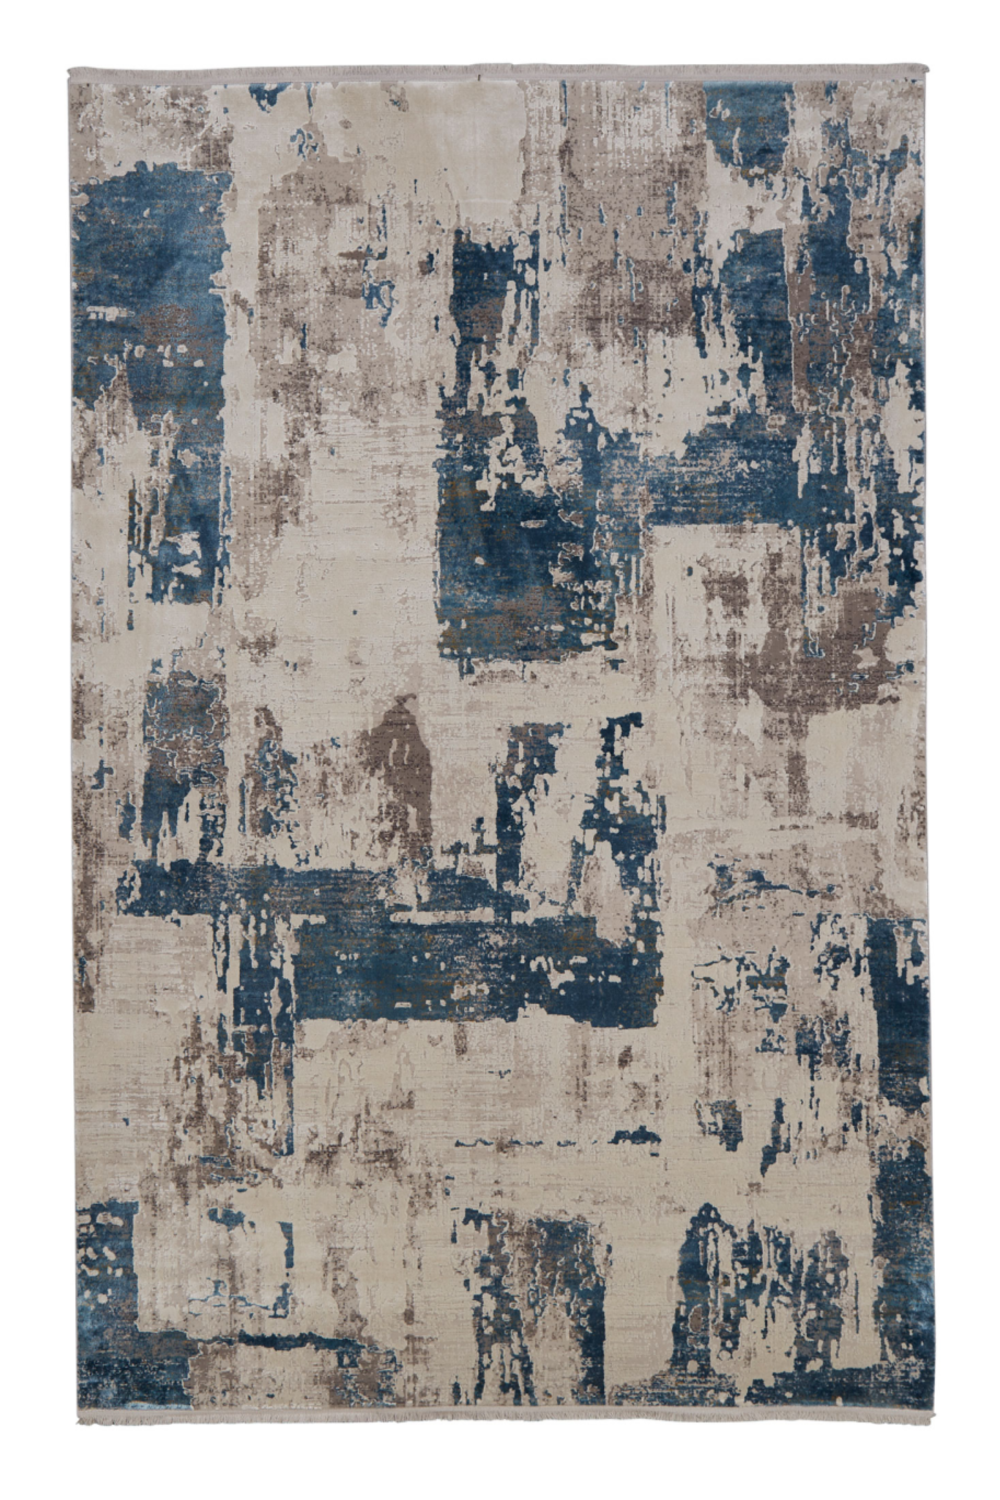 Blue and Beige Patterned Rug 6'5" x 9'5" | Andrew Martin Azra | Oroa.com